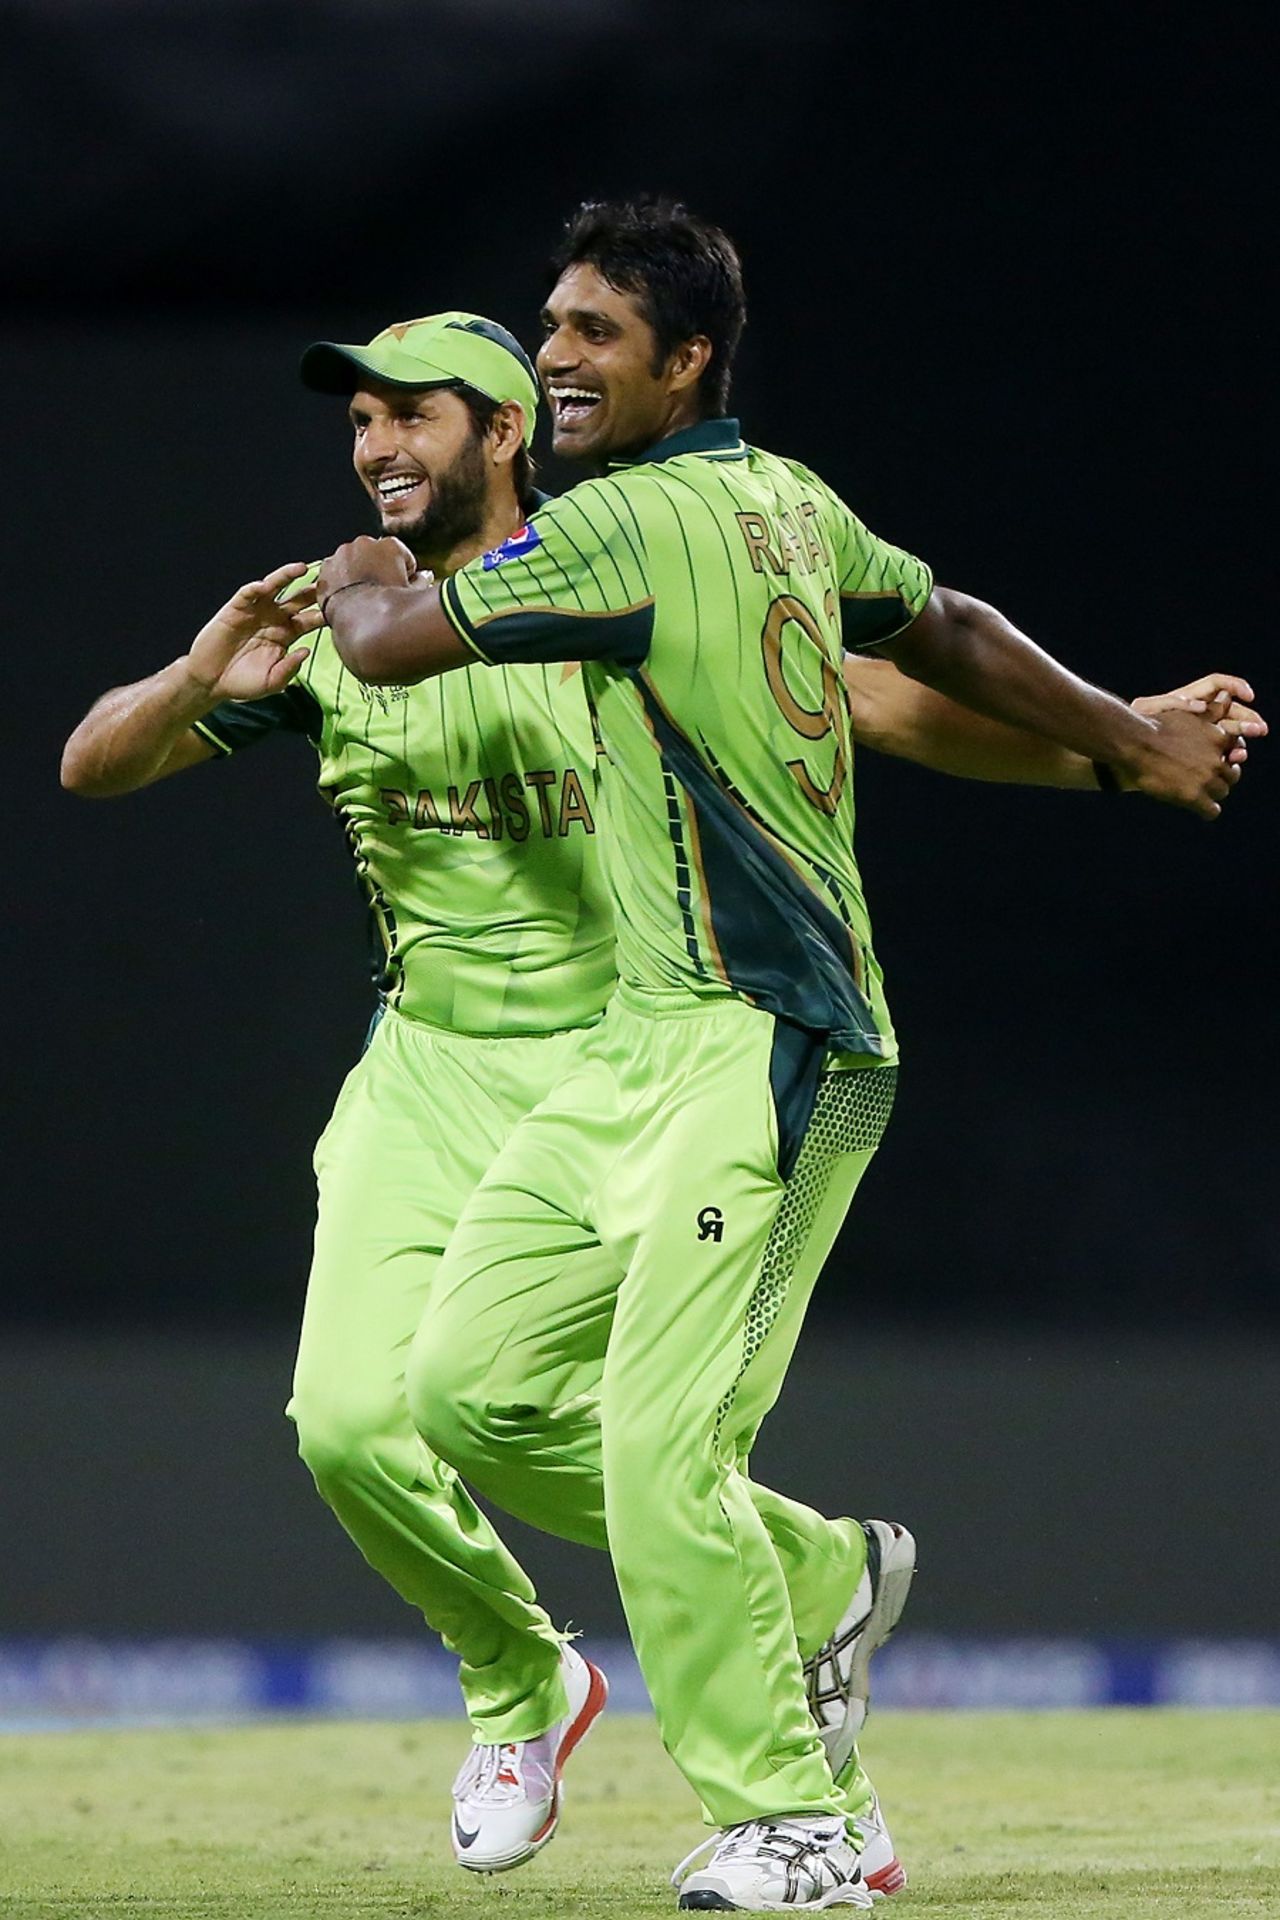 Twinkle toes: Shahid Afridi and Rahat Ali celebrate a wicket, Pakistan v Zimbabwe, World Cup 2015, Group B, Brisbane, March 1, 2015